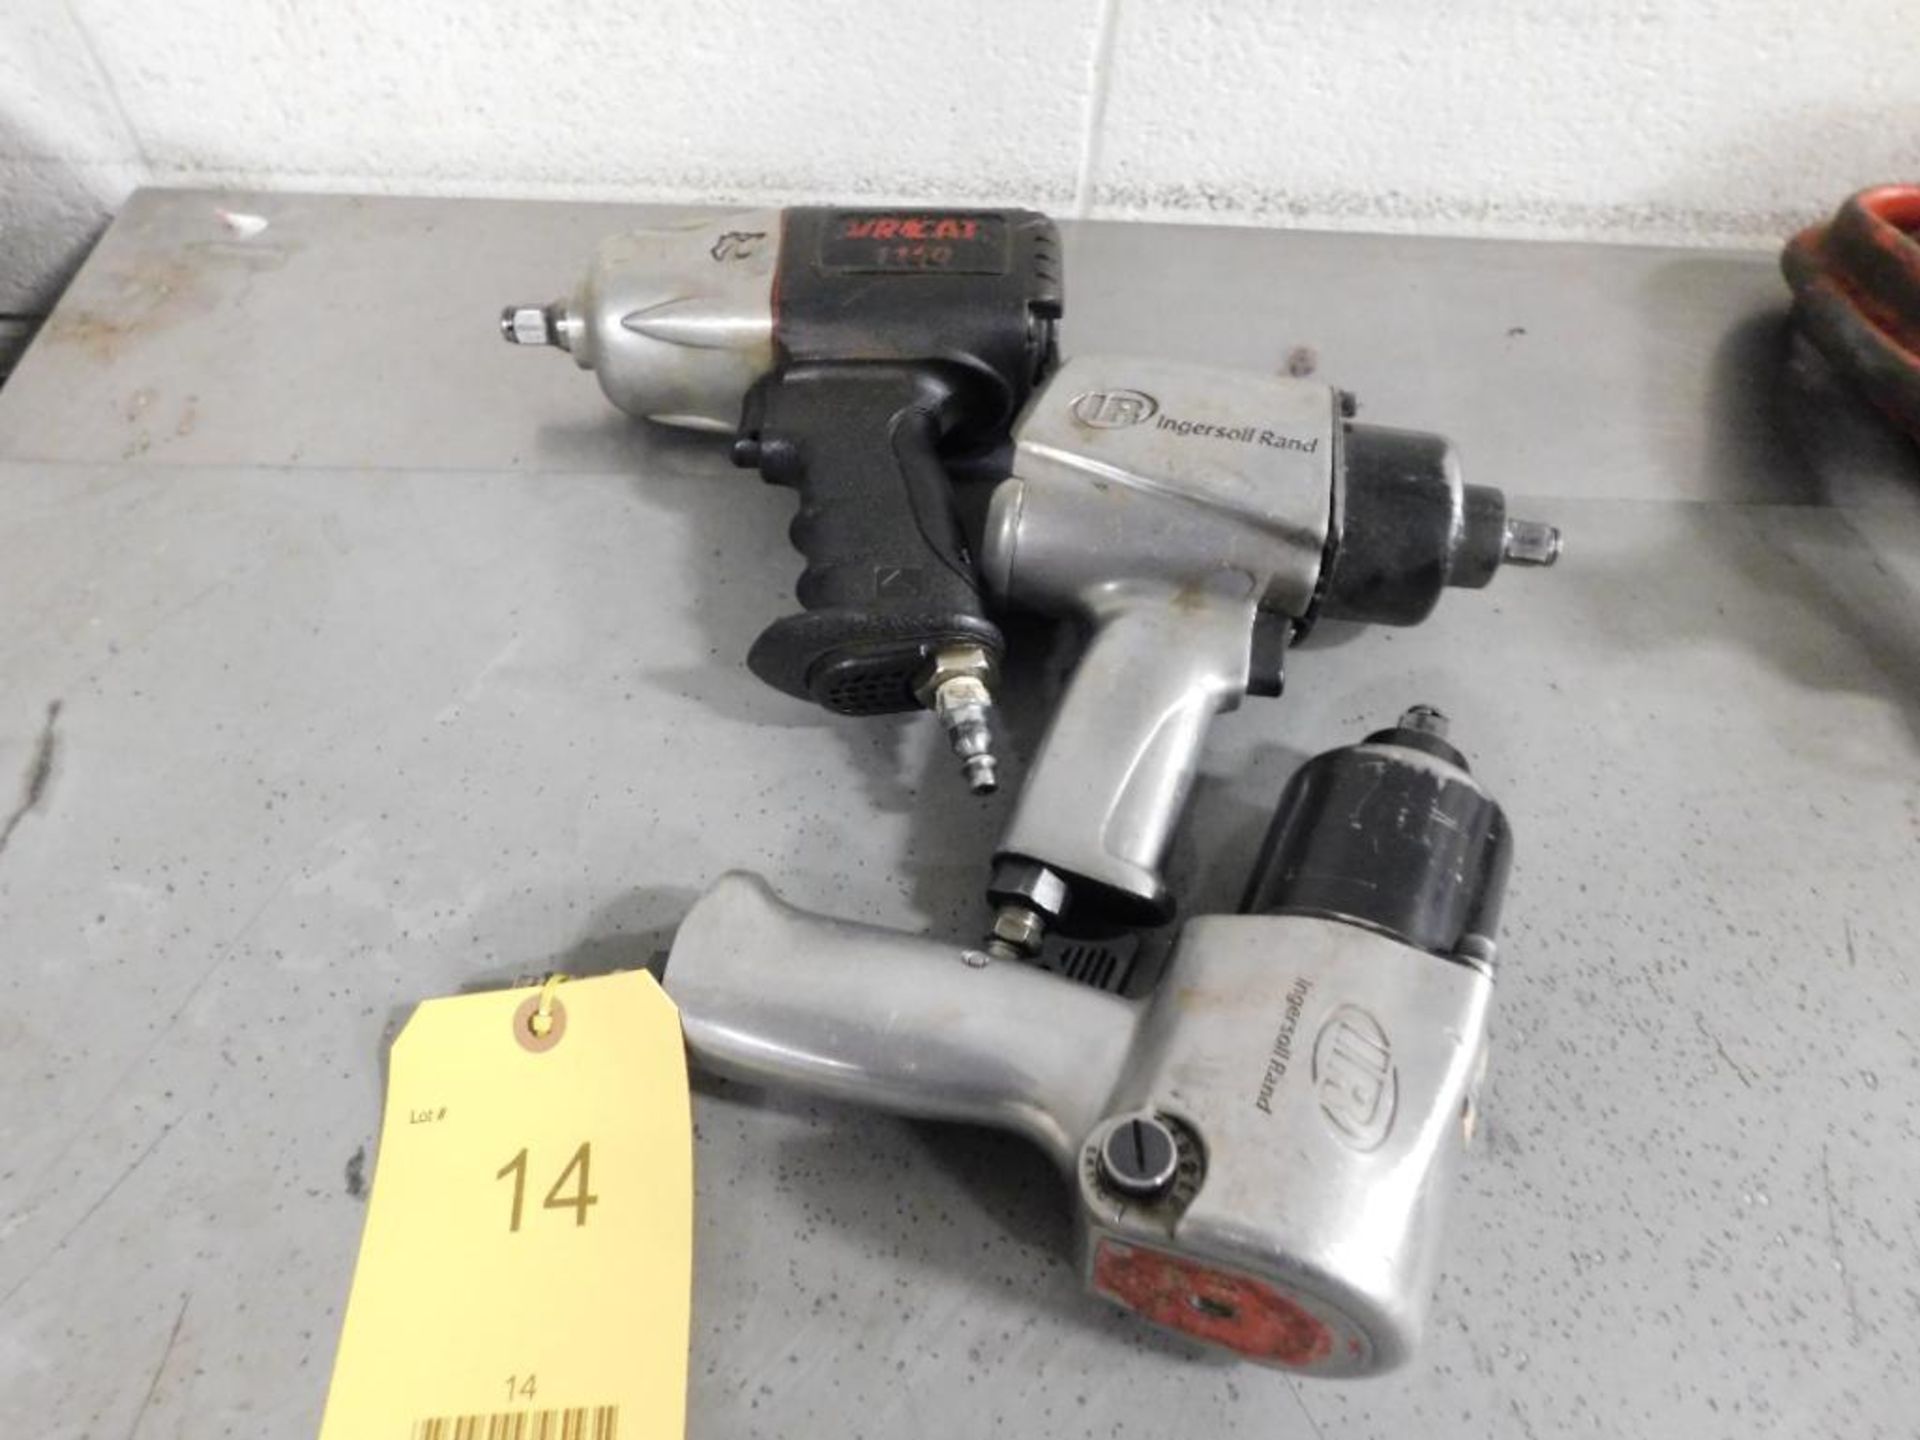 LOT: (2) Ingersoll Rand Pneumatic Impact Wrenches, (1) Aircat 1/2" Pneumatic Impact Wrench